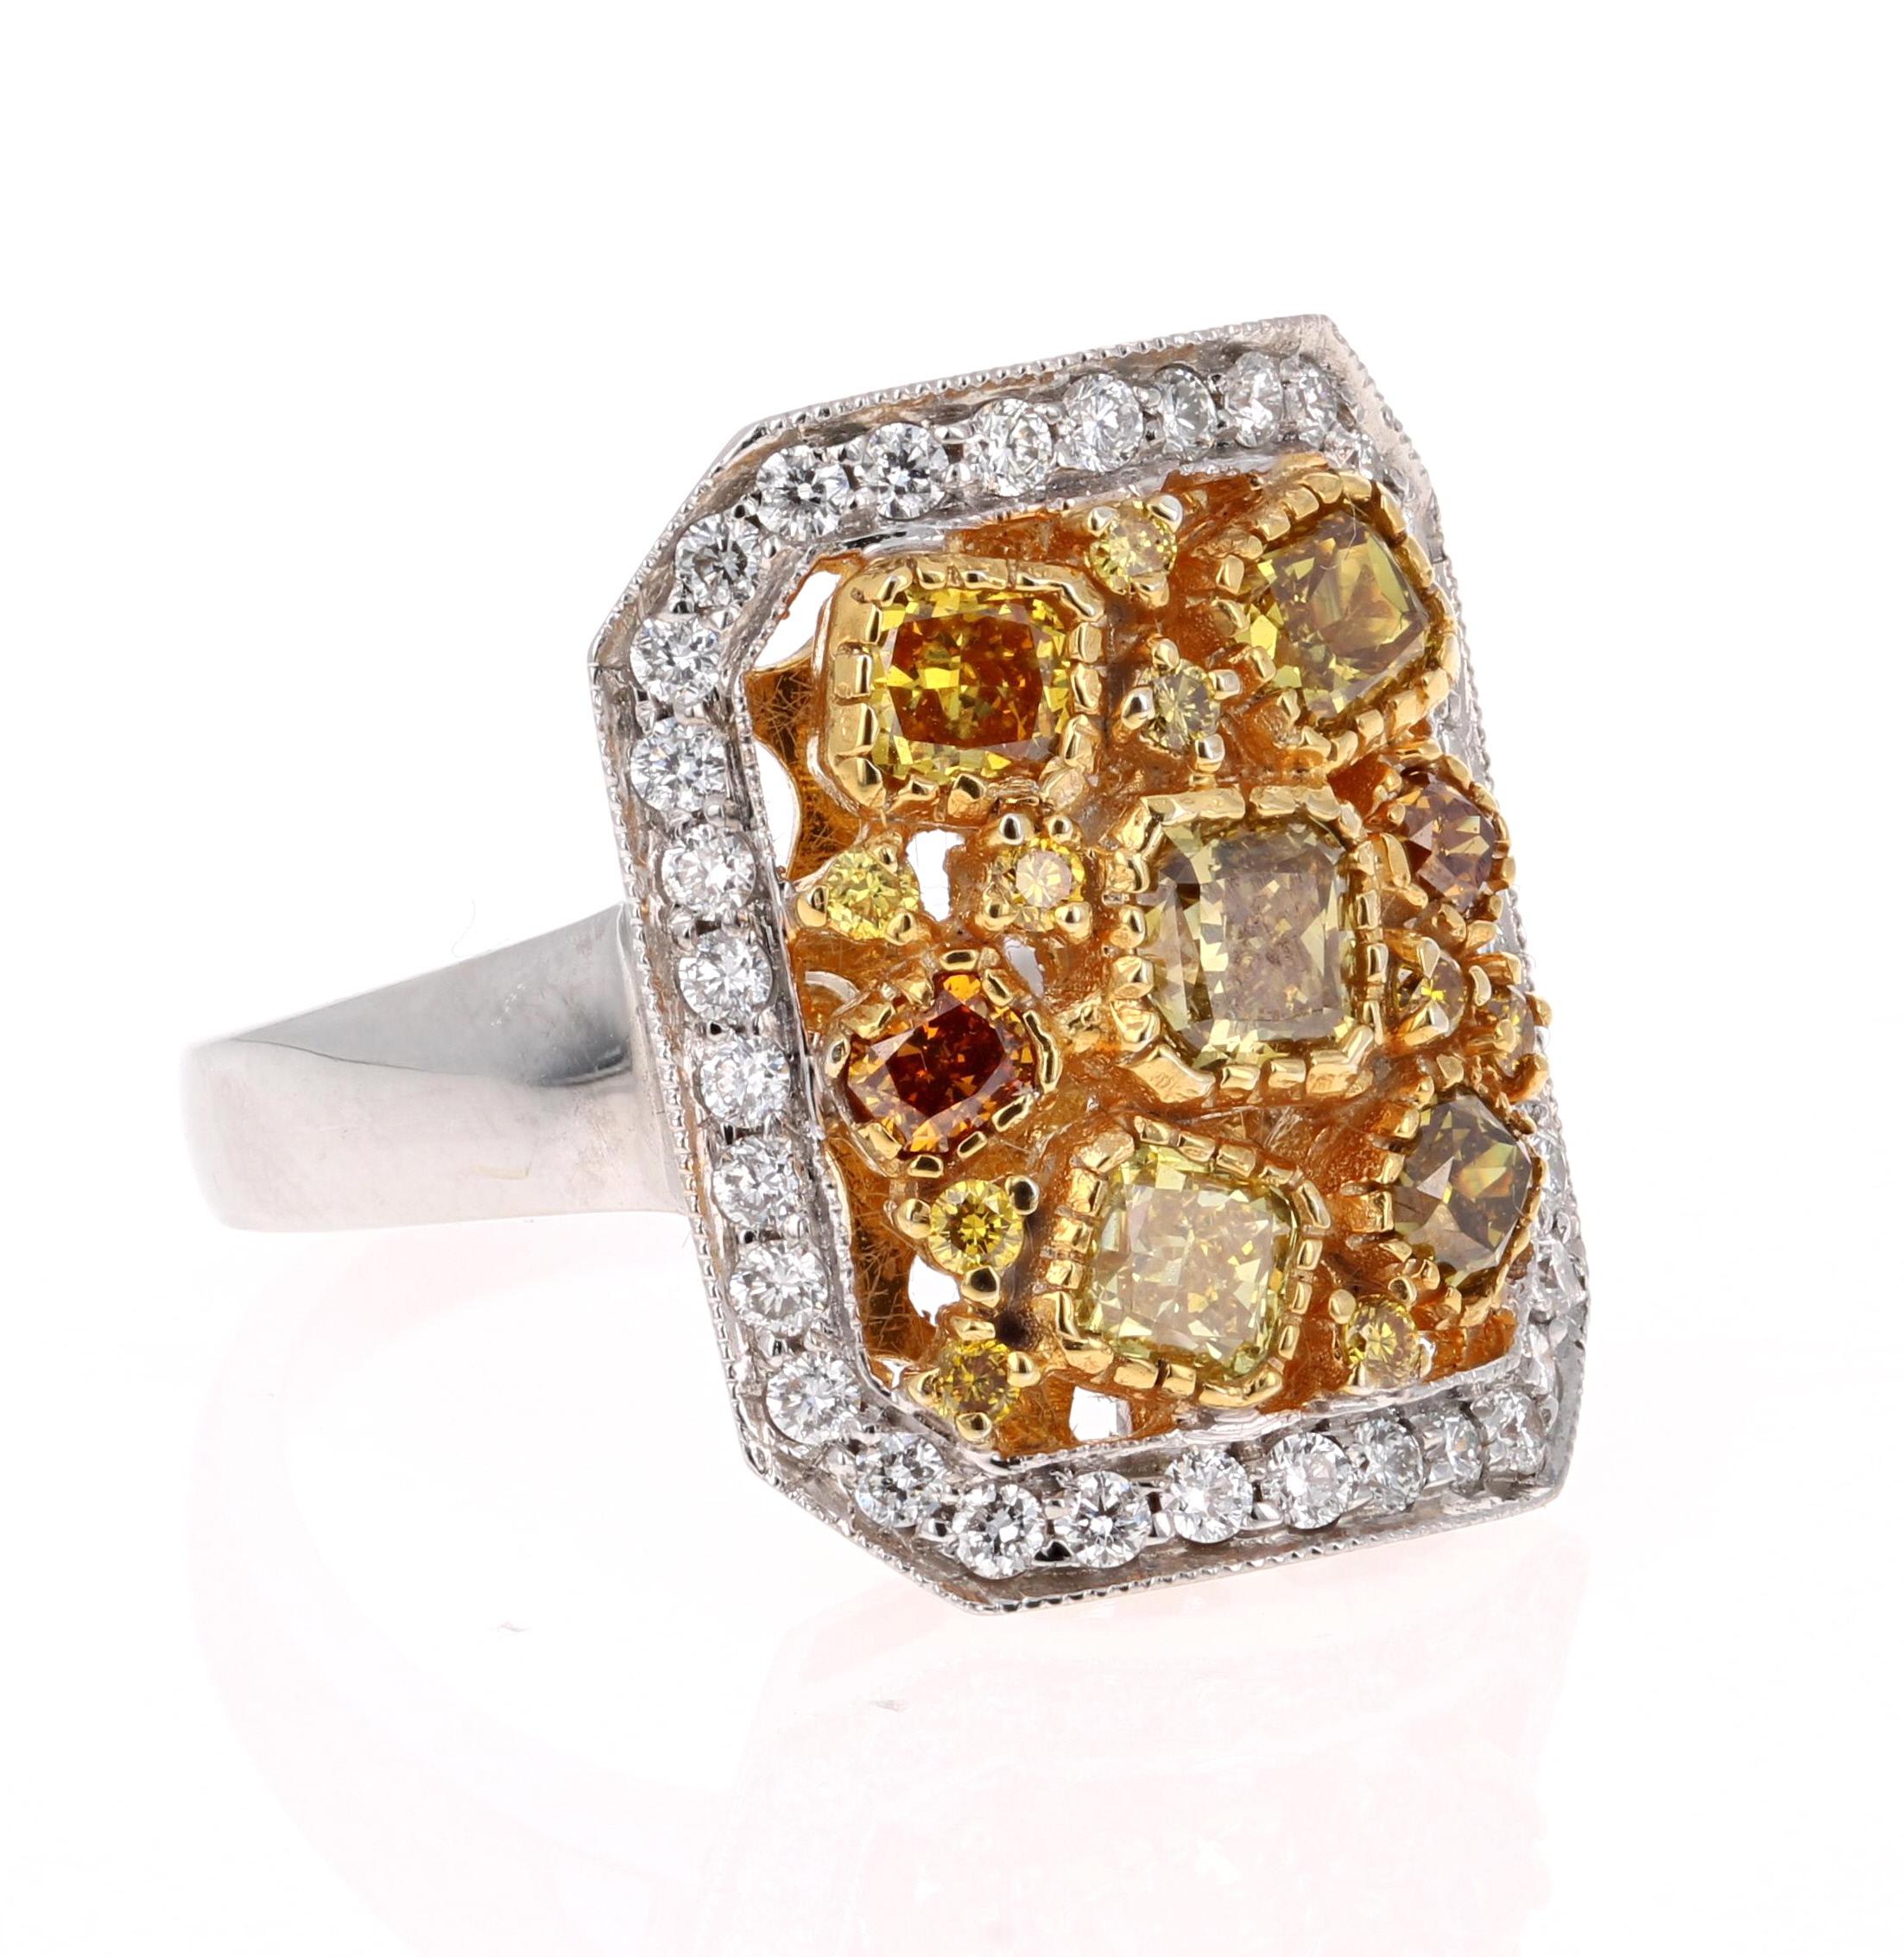 This magnificent beauty has Fancy Color Cushion Cut Natural Diamonds floating around the ring. The 7 Fancy Color Cushion Cuts weigh 1.49 Carats. It is embellished with 9 Yellow Round Cut Diamonds that weigh 0.12 Carats. It is further adorned with 34